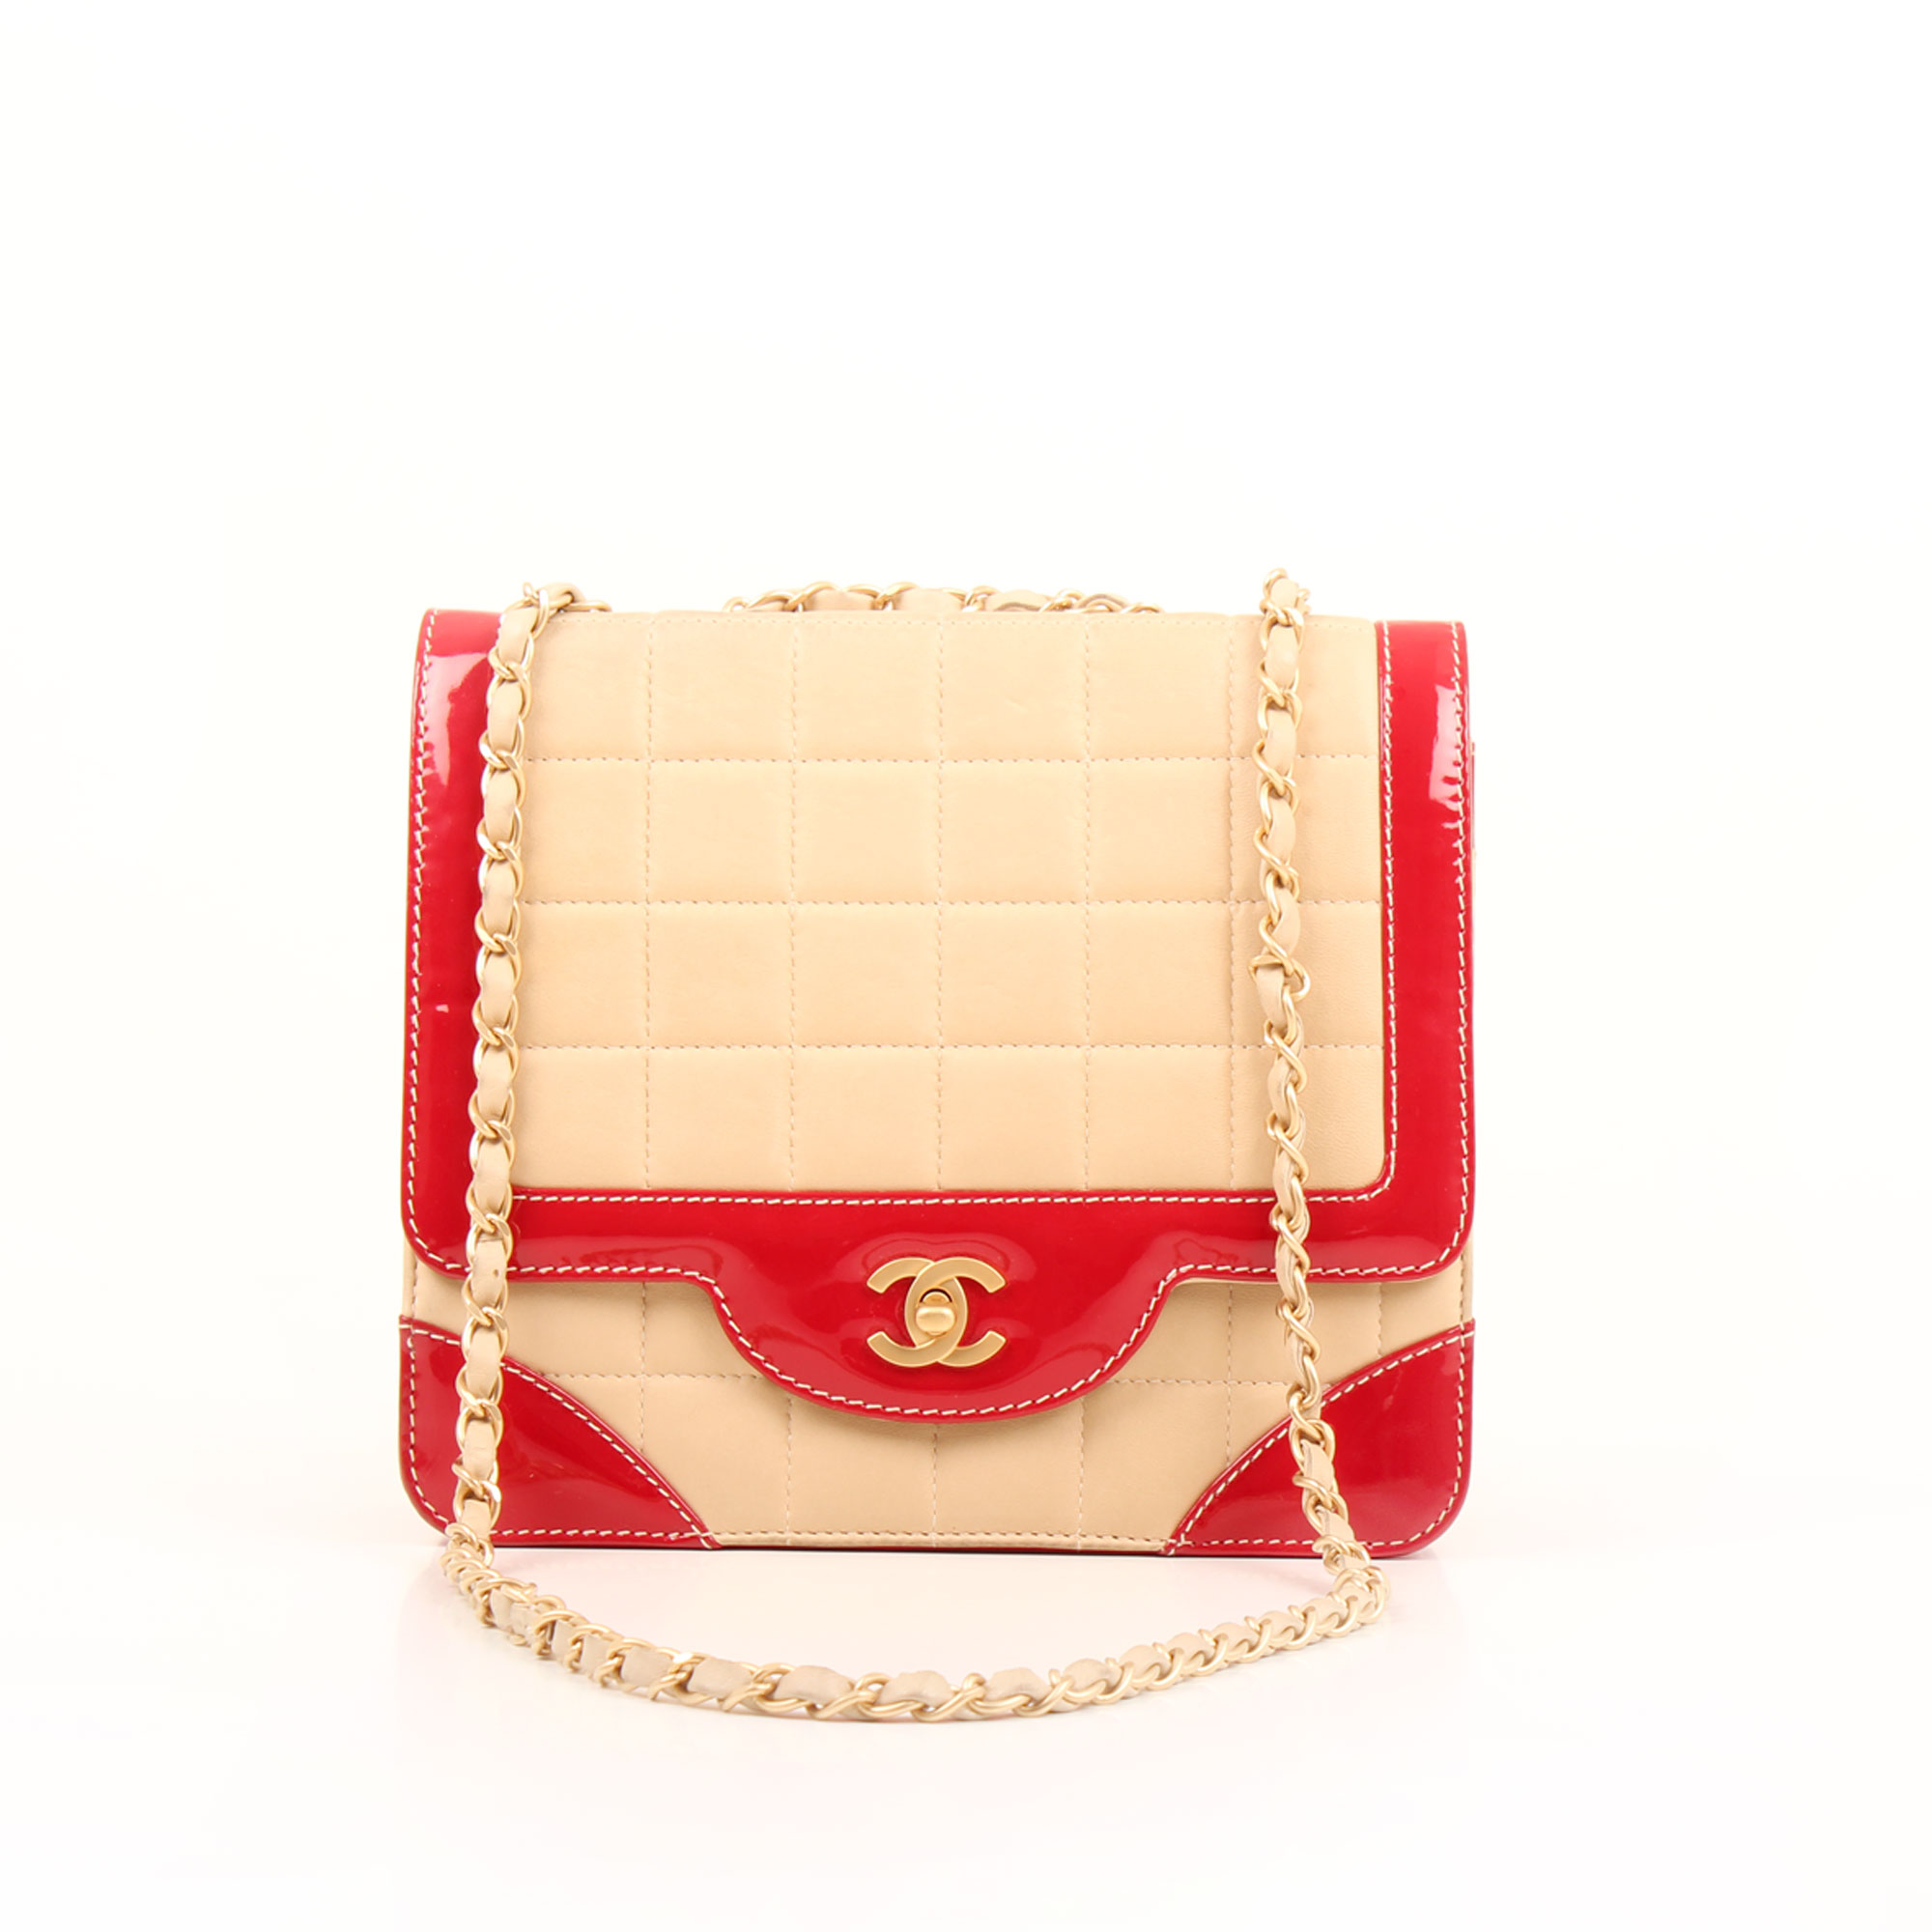 Front image of chanel bicolor choco bar single flap